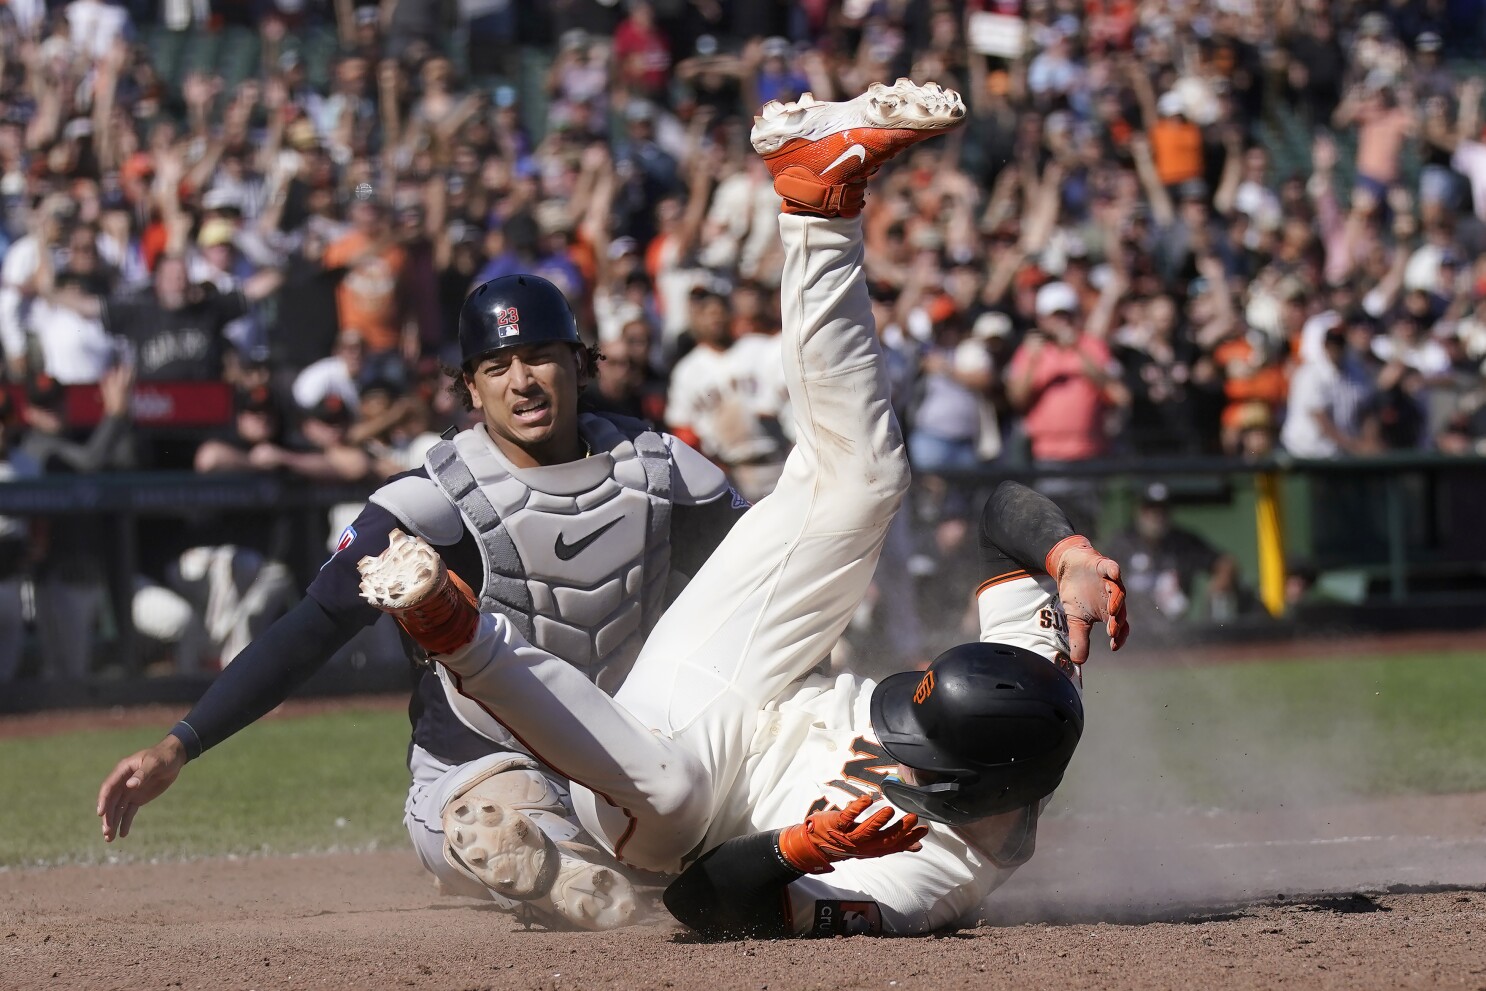 Giants Beat Padres, Win NL West Title on Season's Final Day - GV